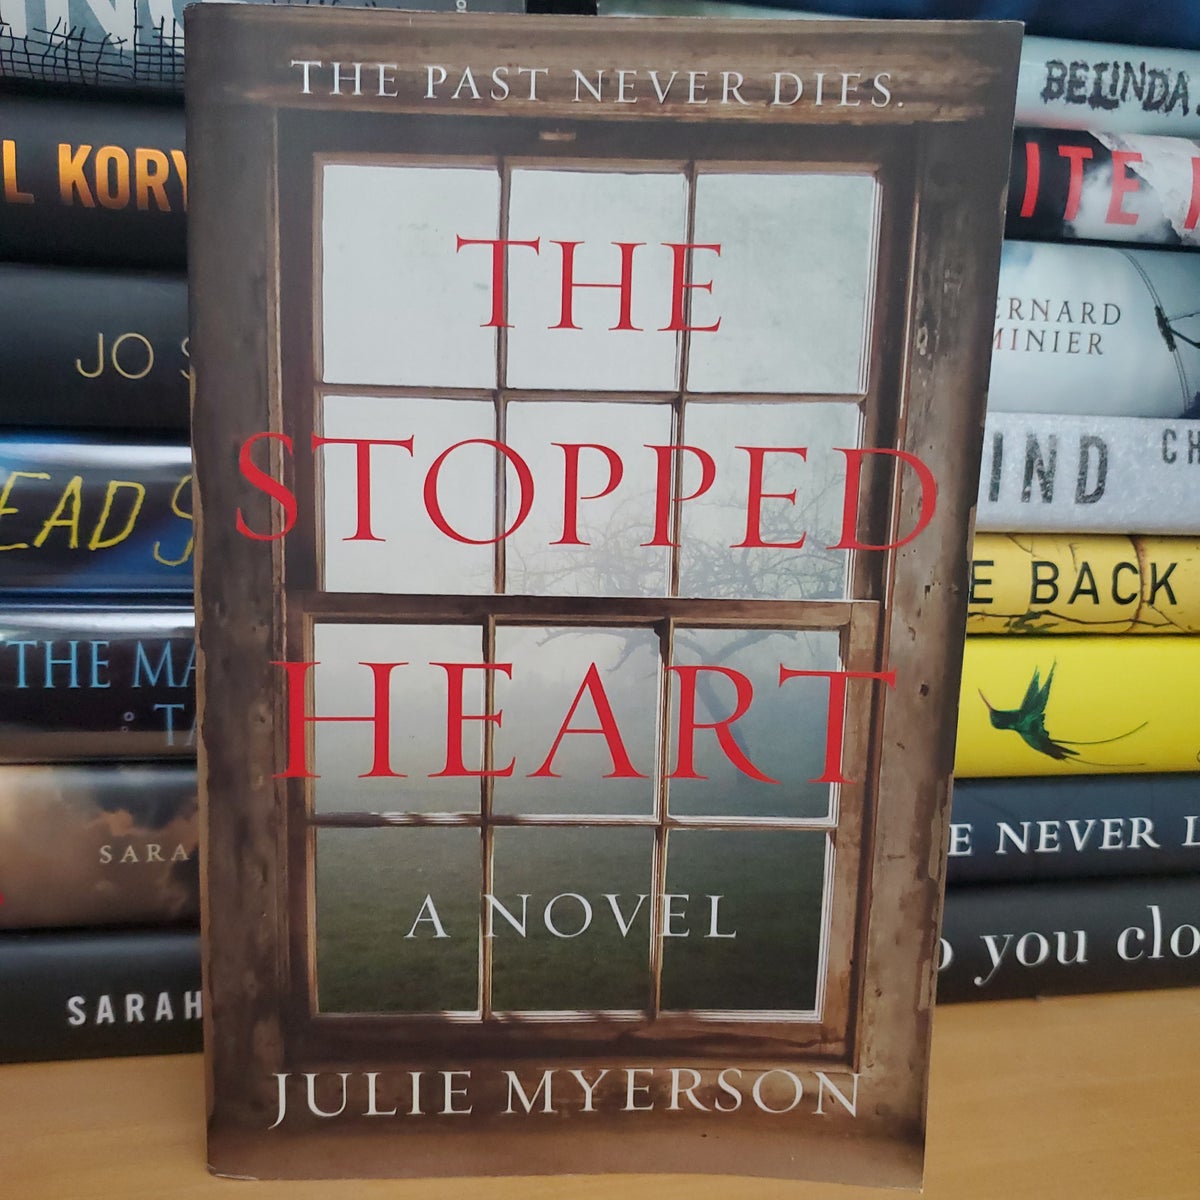 The Stopped Heart by Julie Myerson, Paperback